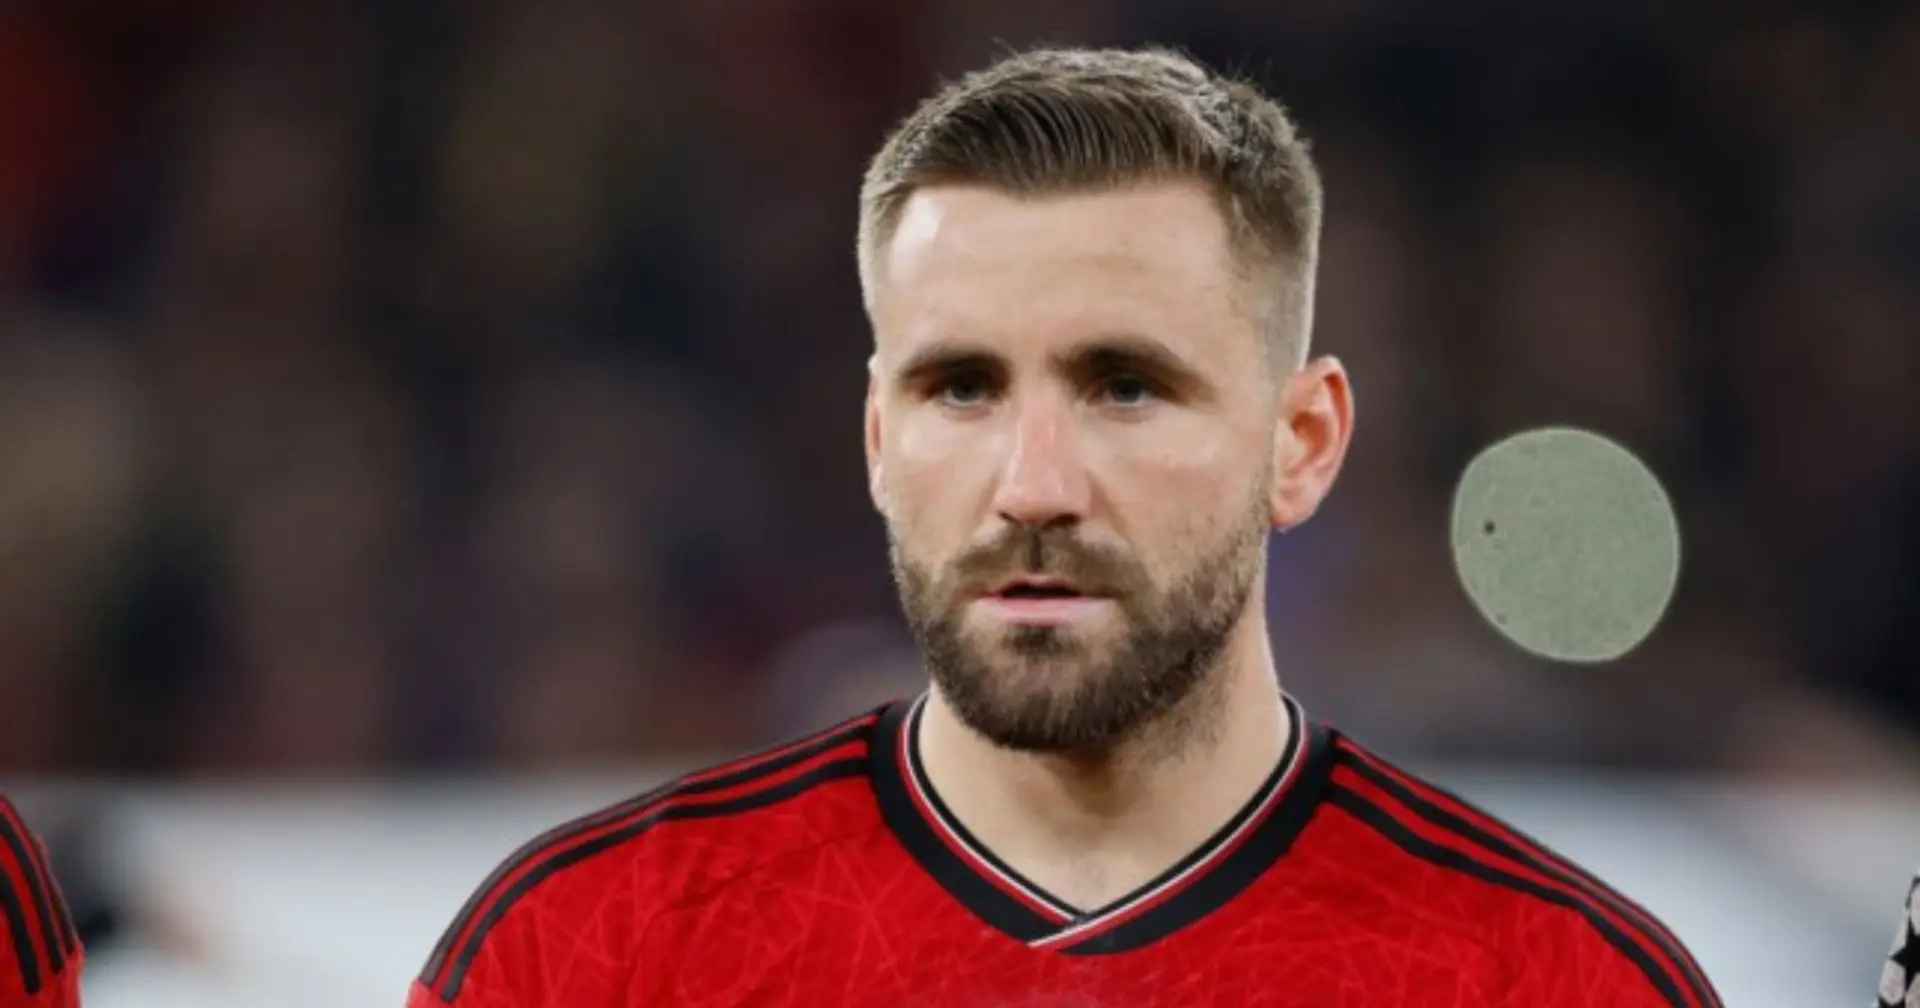 '2 decent seasons out of 10': Man United fans believe it's time to move on from Luke Shaw